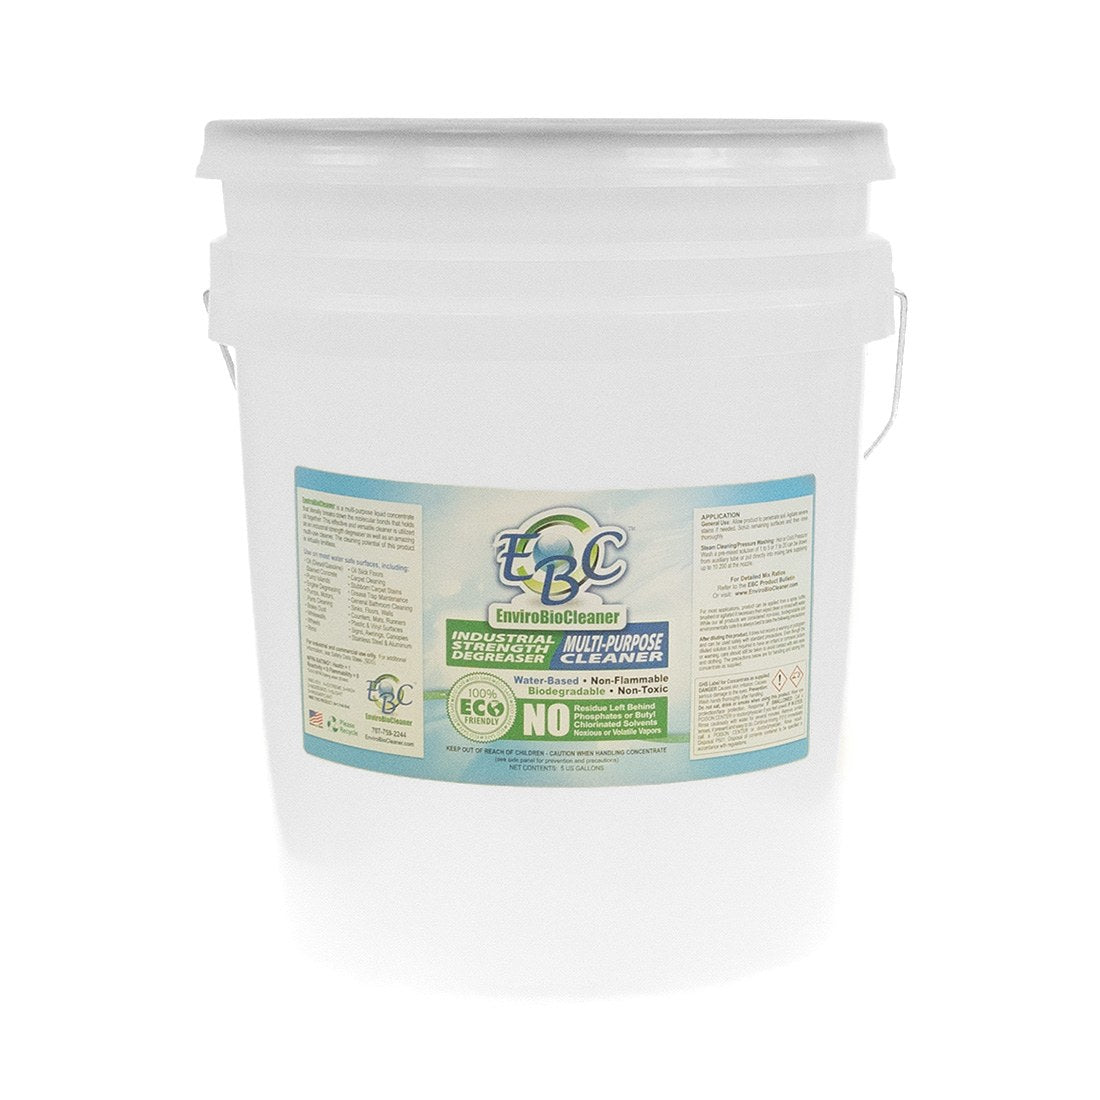 EBC Degreaser 5 Gallon Pail Front View